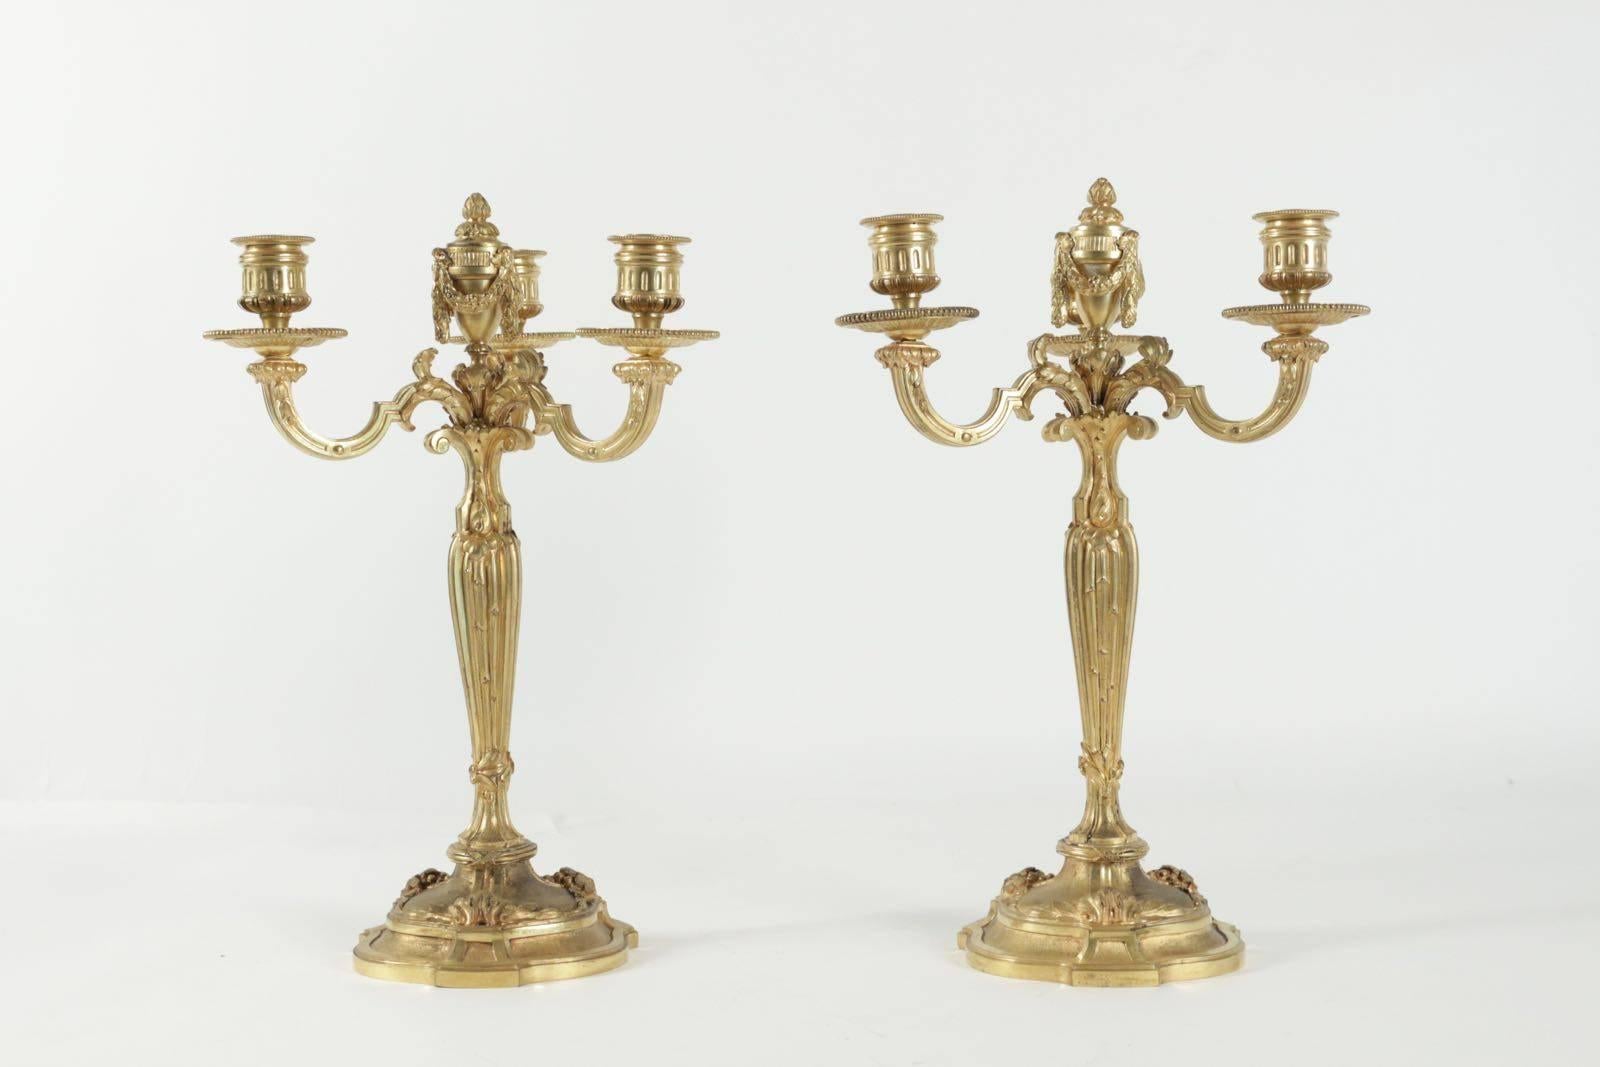 Pair of candelabra in the style of Louis XV in gold gilt bronze, 19th century.
 